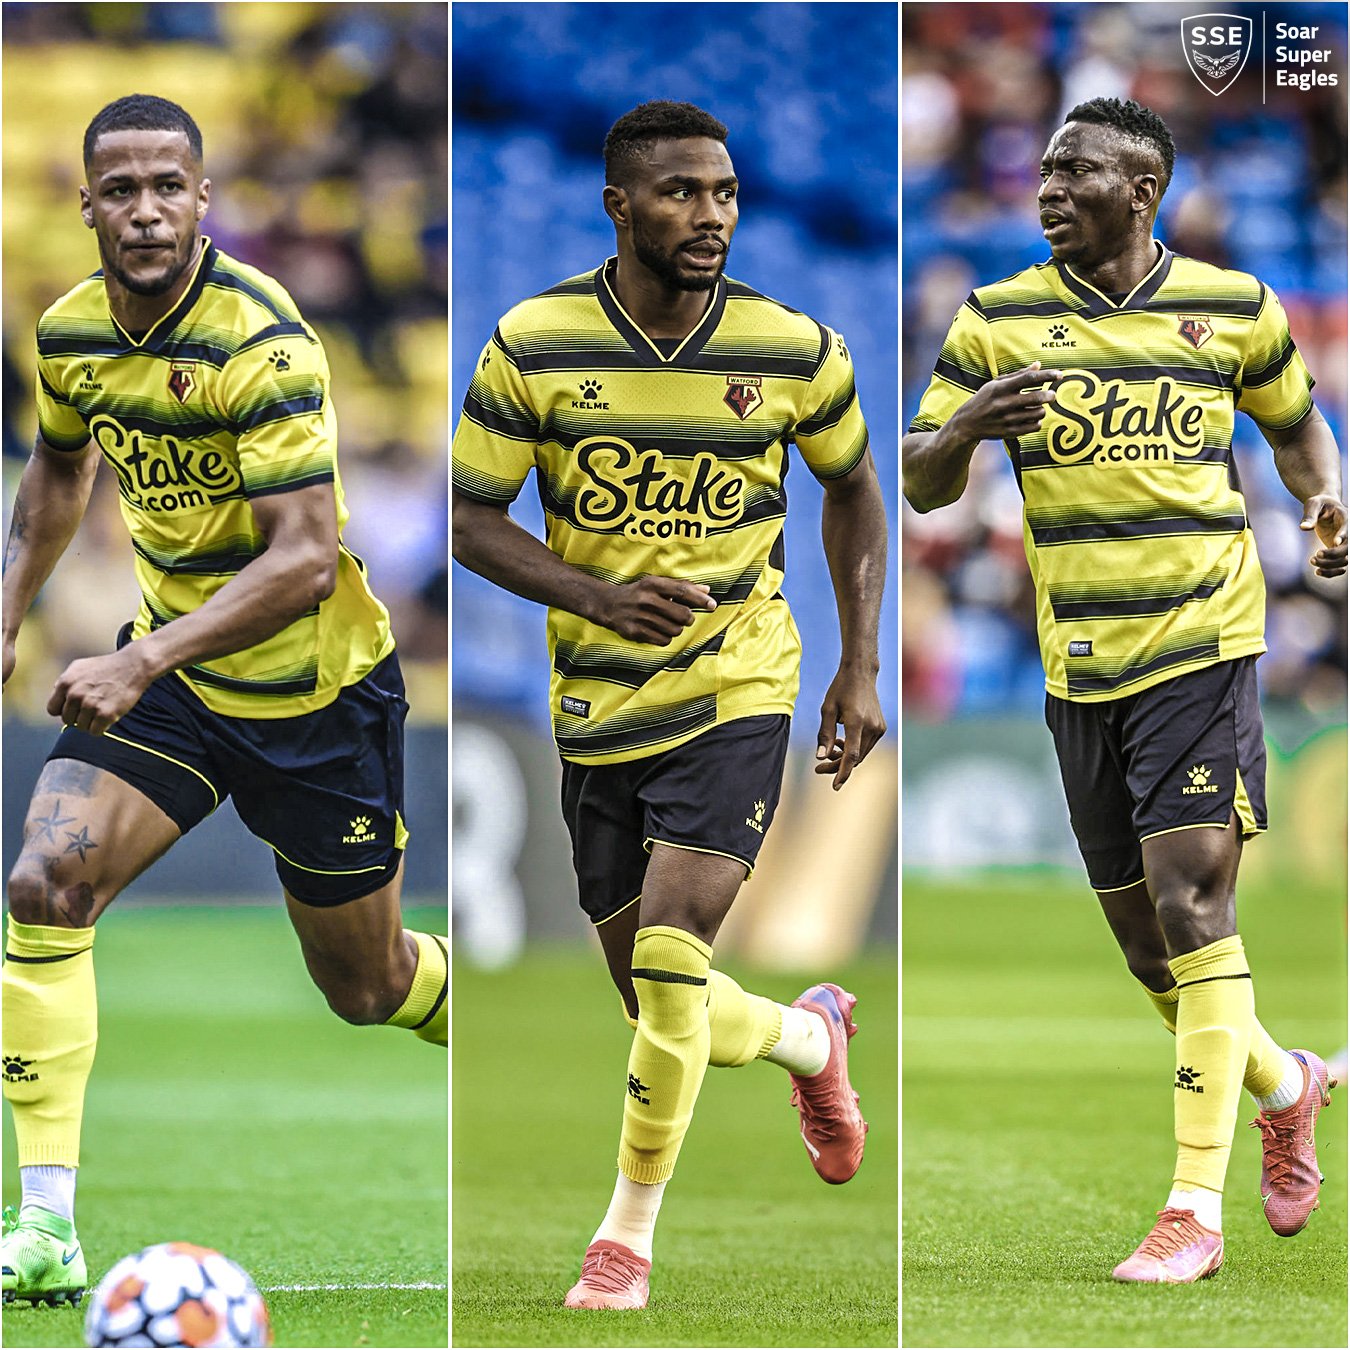 Soar Super Eagles on Twitter: "William Troost-Ekong, Emmanuel Dennis &  'Karo Etebo all start for Watford in their season-opener vs. Aston Villa.  It's the first time 3+ Nigerians are starting a #PL game for the same club  since Yakubu, Yobo & Anichebe started ...